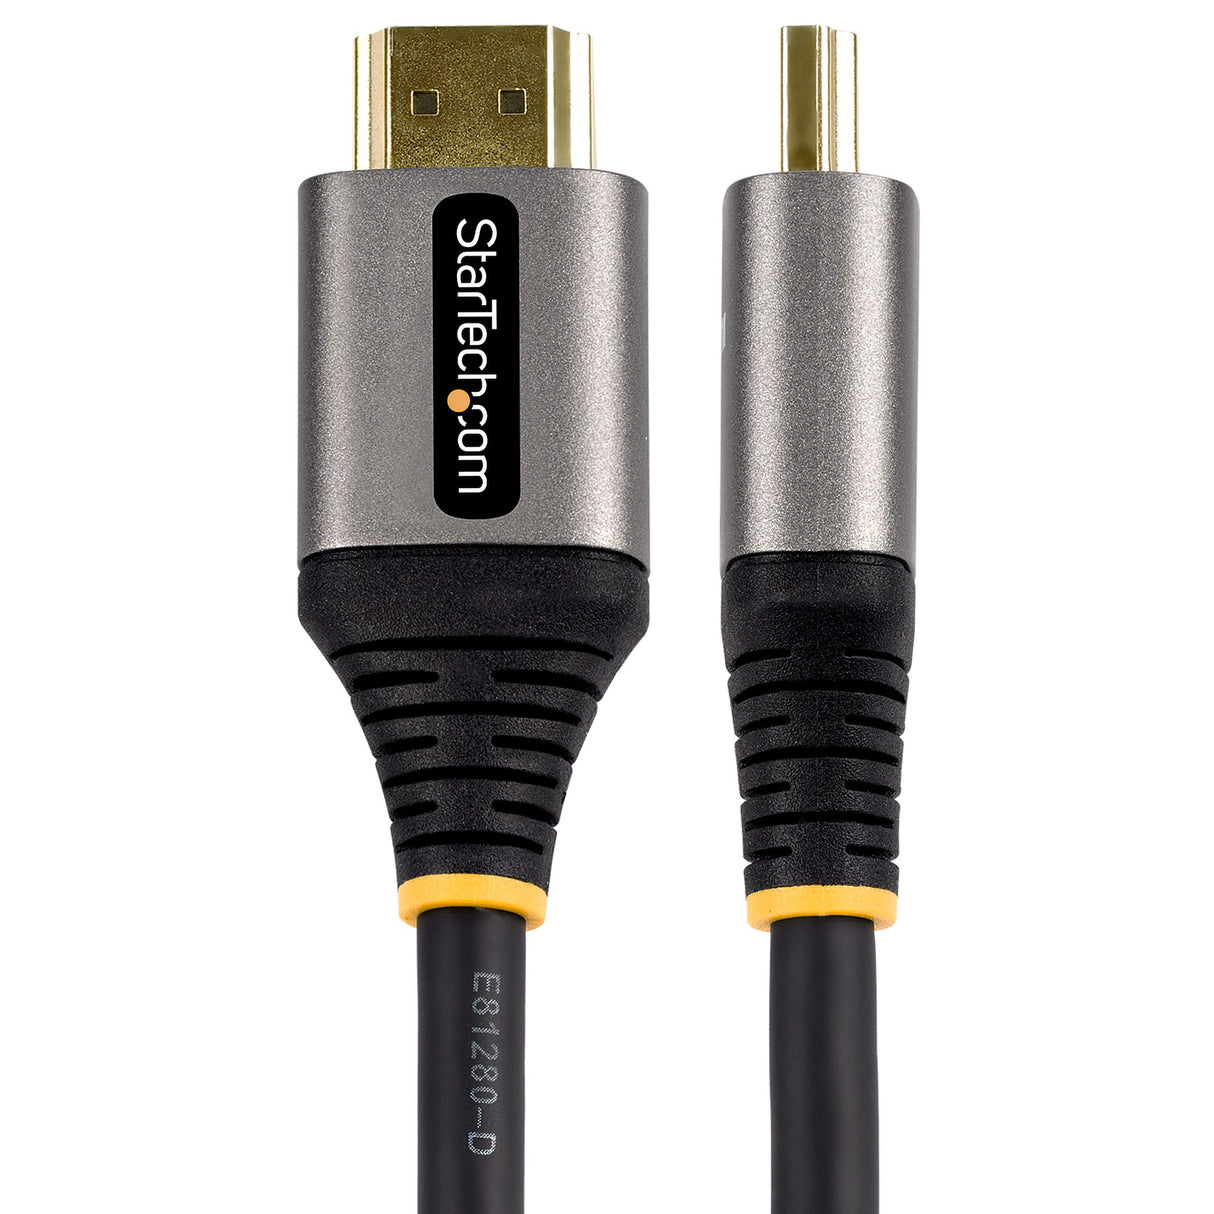 STARTECH 10ft (3m) HDMI 2.1 Cable 8K - Certified Ultra High Speed HDMI Cable 48Gbps - 8K 60Hz|4K 120Hz HDR10+ eARC - Ultra HD 8K HDMI Cable - Monitor|TV|Display - Flexible TPE Jacket (HDMM21V3M) (HDMM21V3M)